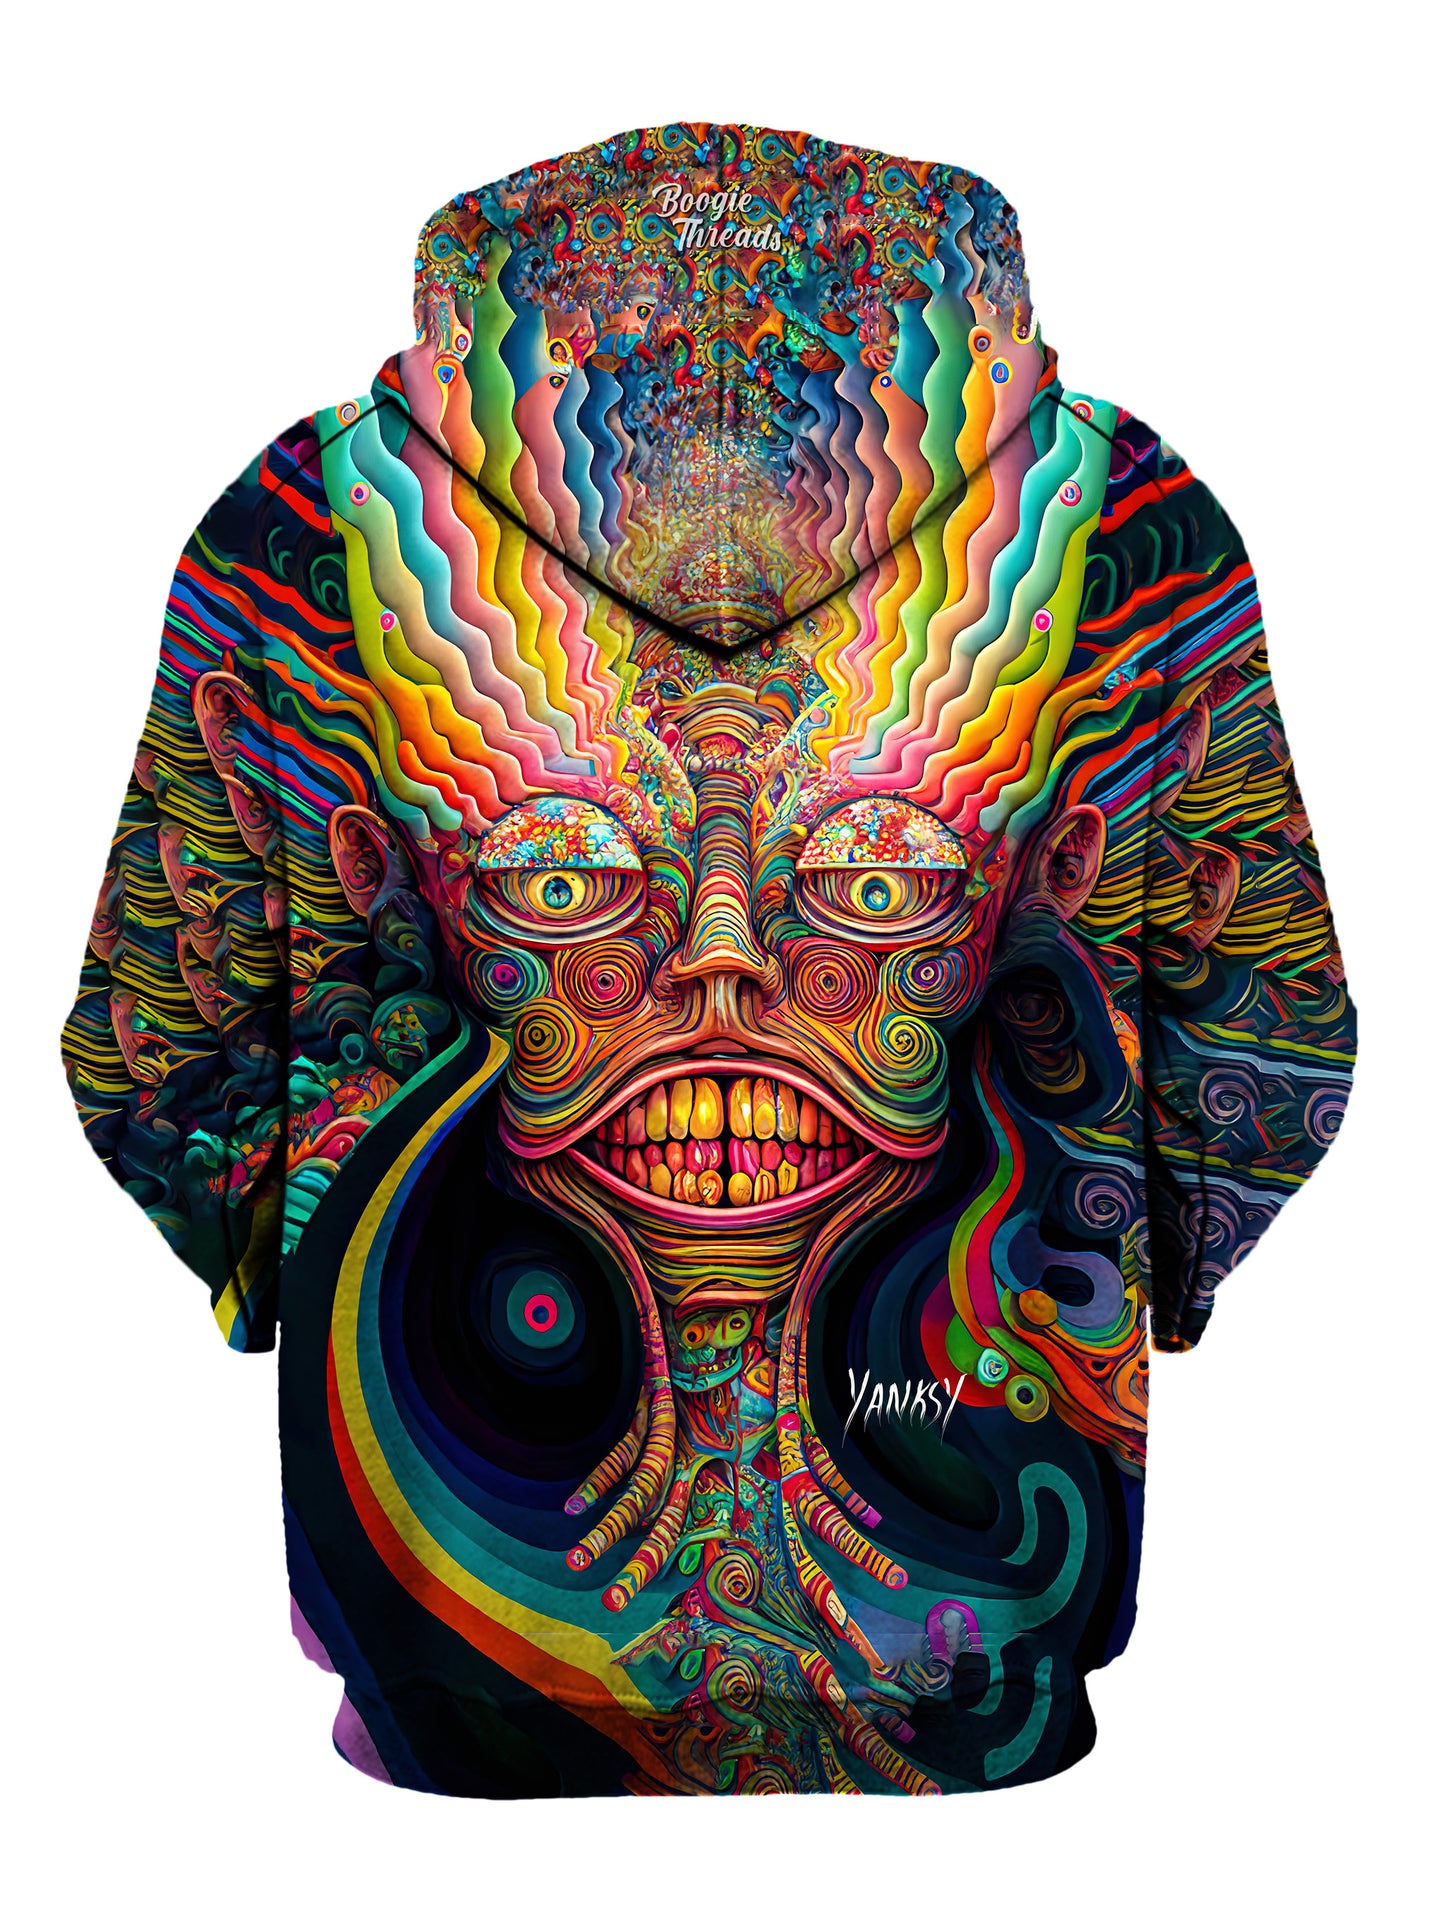 Get ready to make a splash with this mesmerizing sublimation pullover hoodie